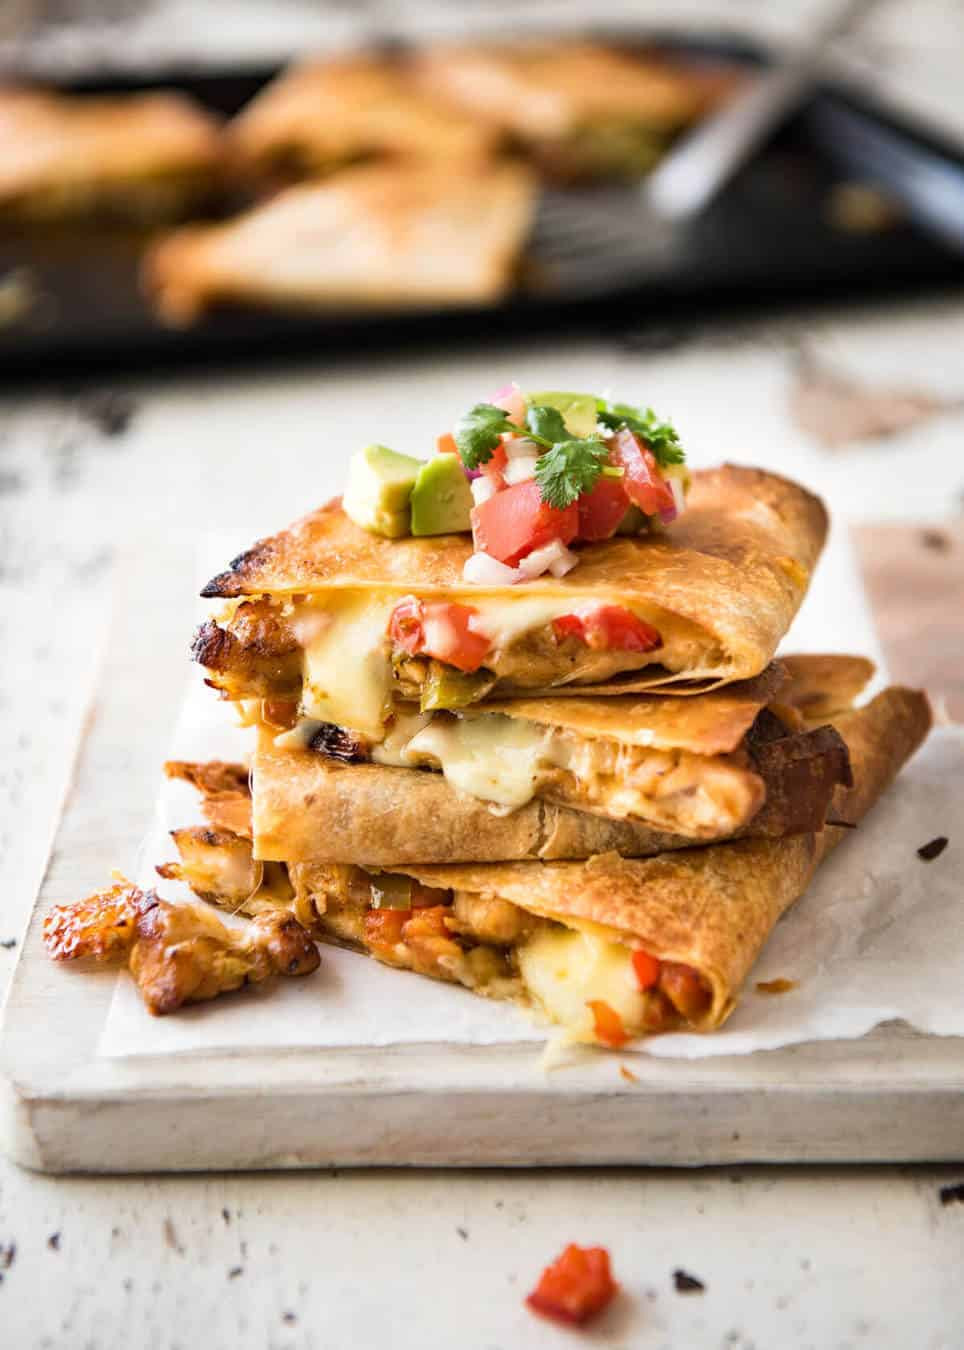 Baked Chicken In Oven
 Oven Baked Chicken Quesadillas